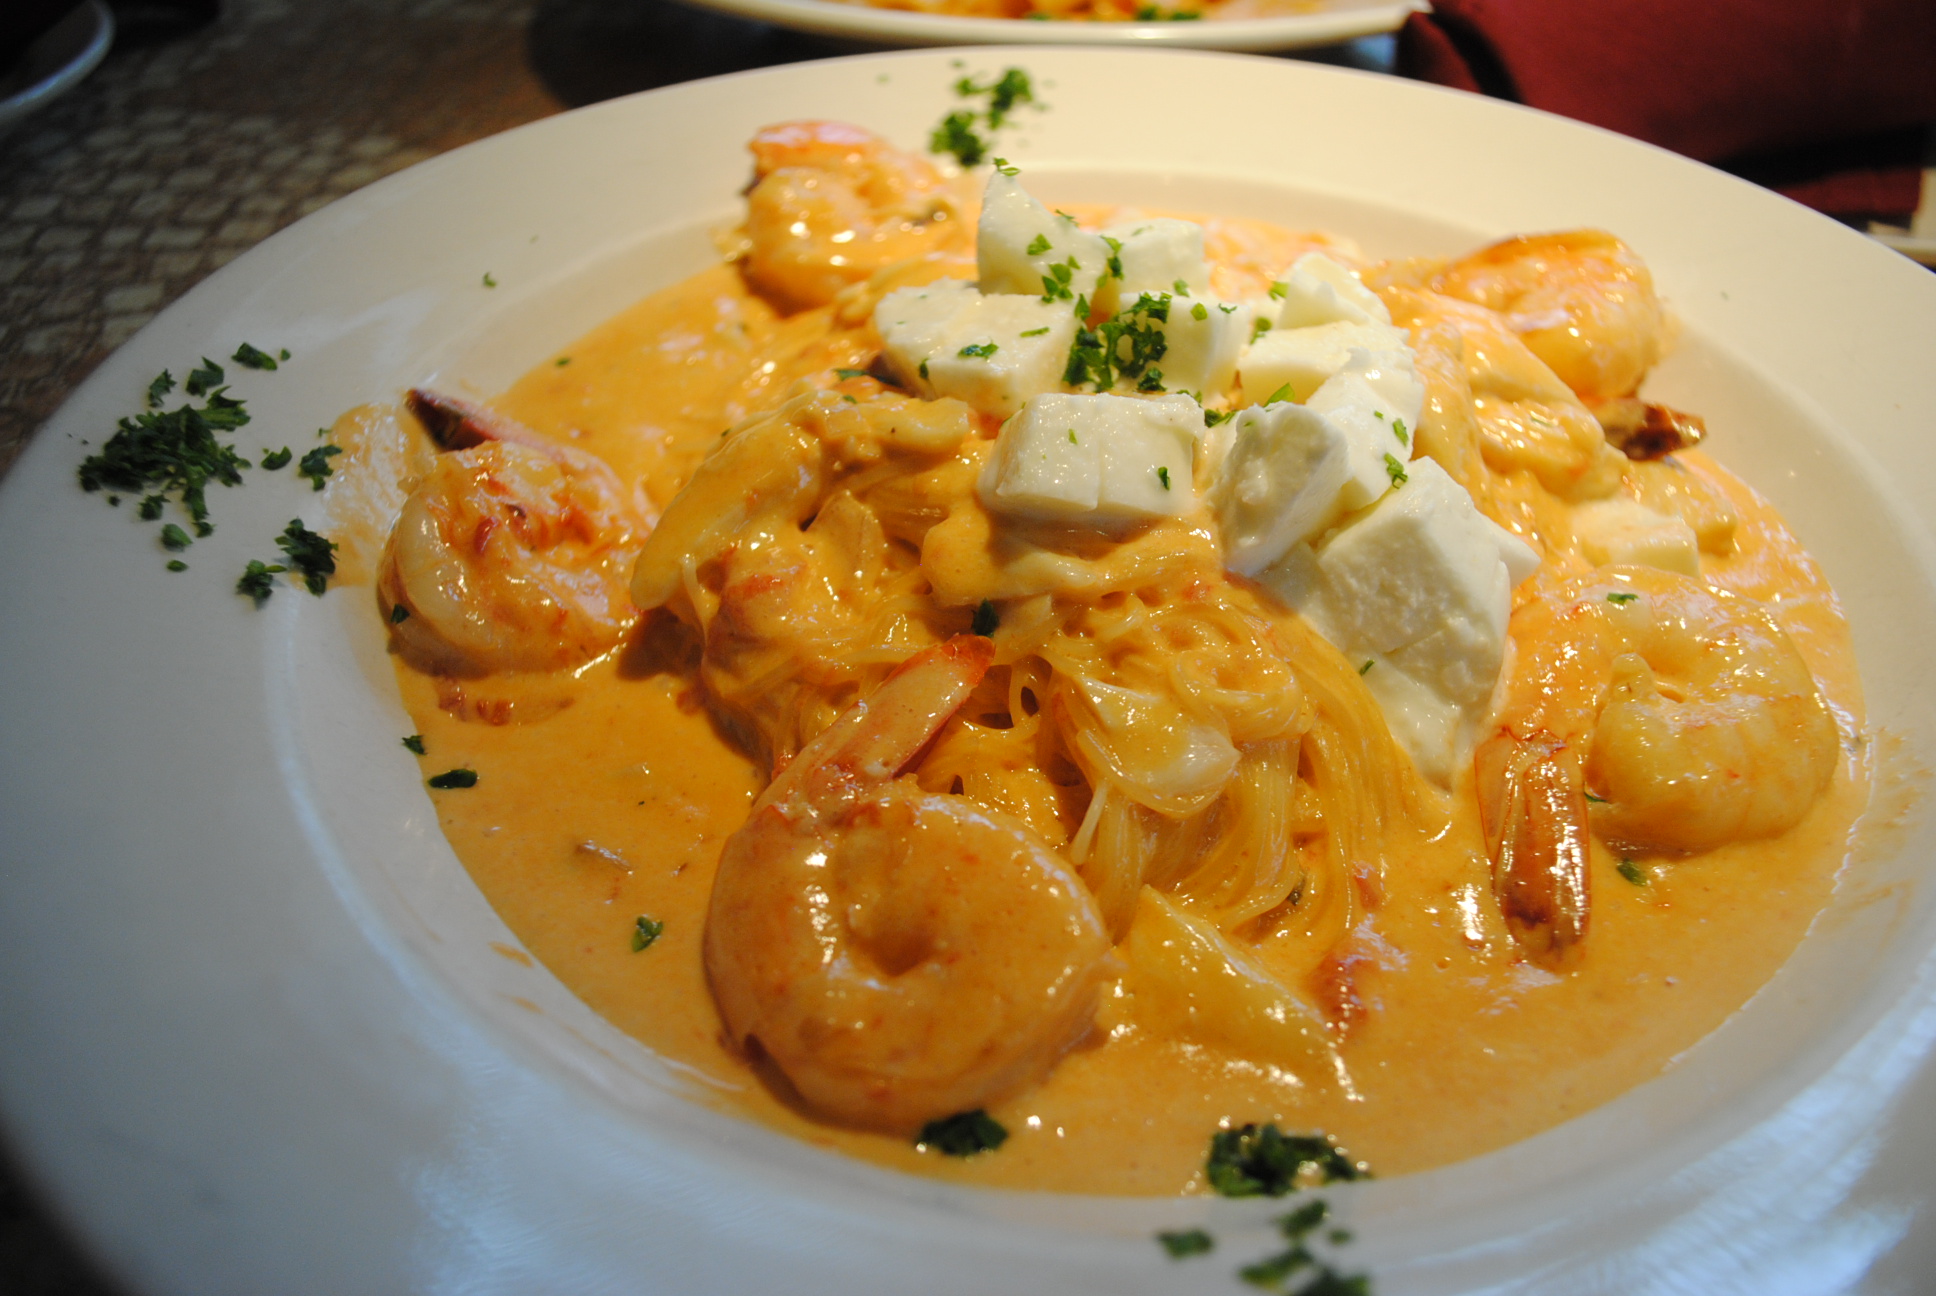 A plate of pasta with shrimp and cheese.